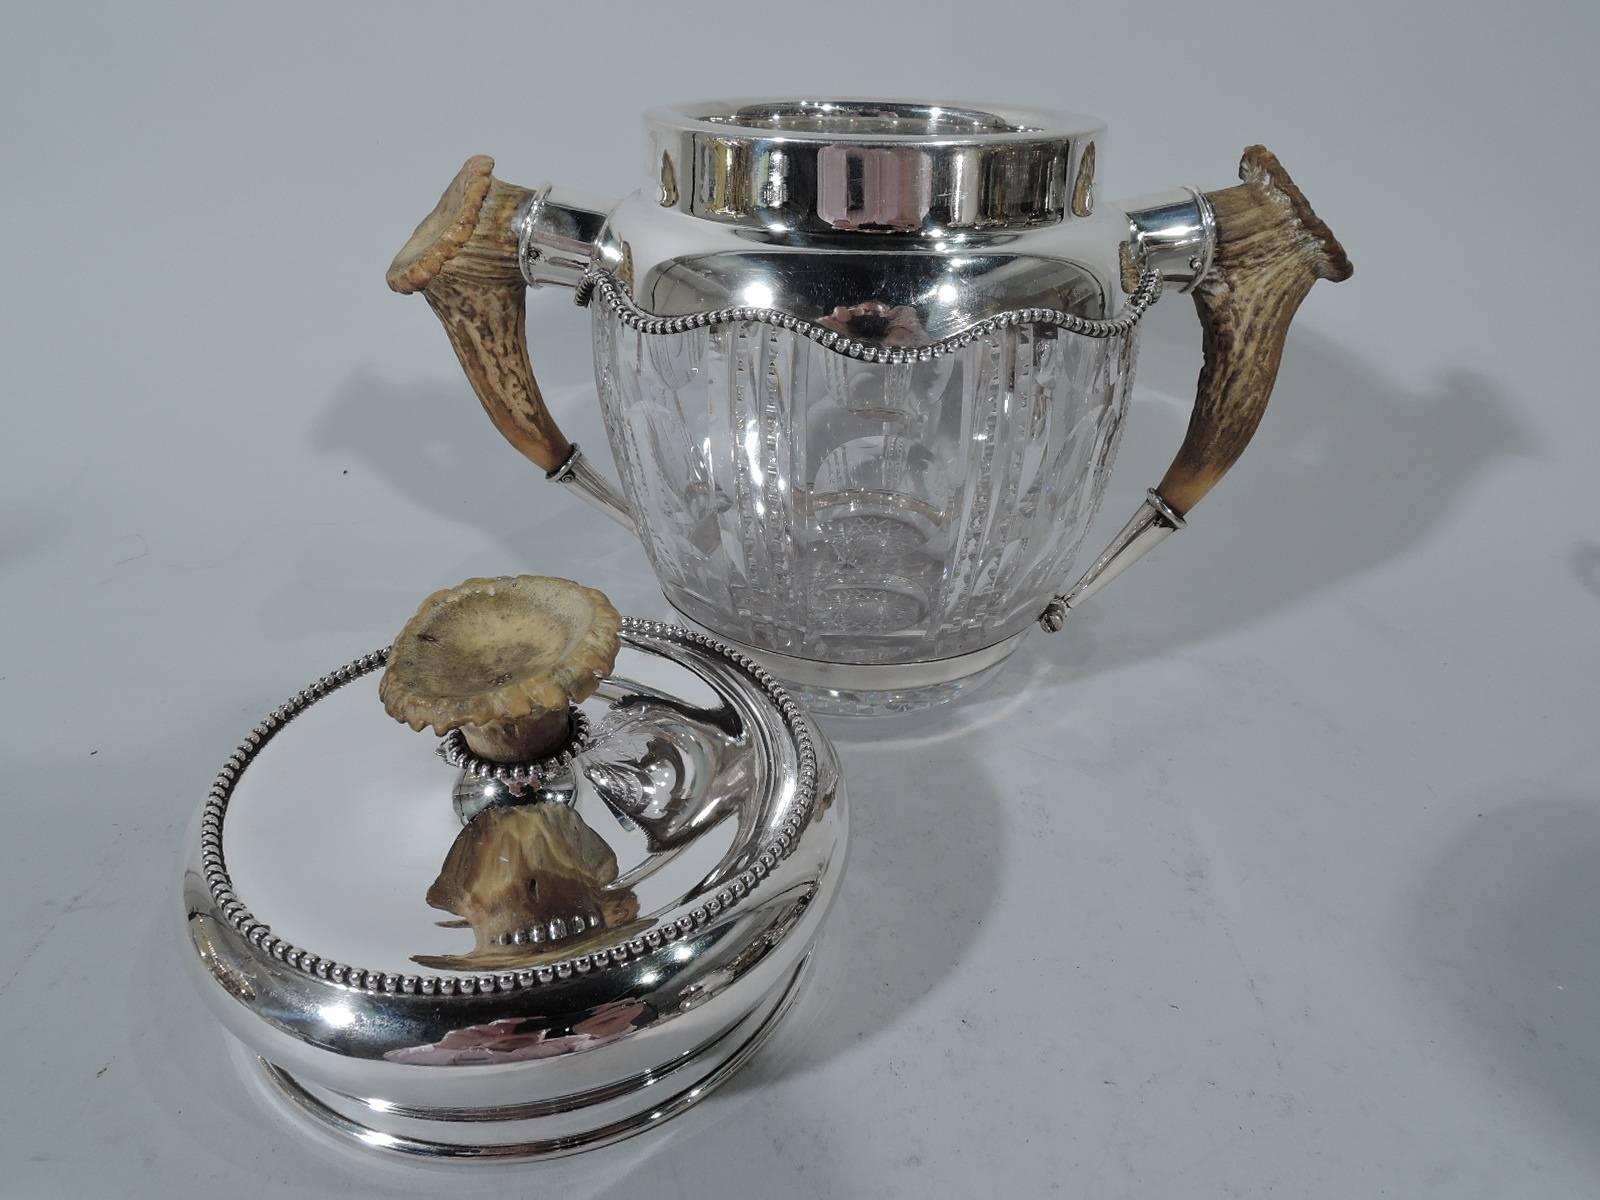 Edwardian cut-glass tobacco jar with sterling silver mounts and cover. Made by Redlich & Co. in New York. Jar has curved sides with vertical ornament: circles alternate with notched double flutes, and antler side handles in mounts. Short neck has